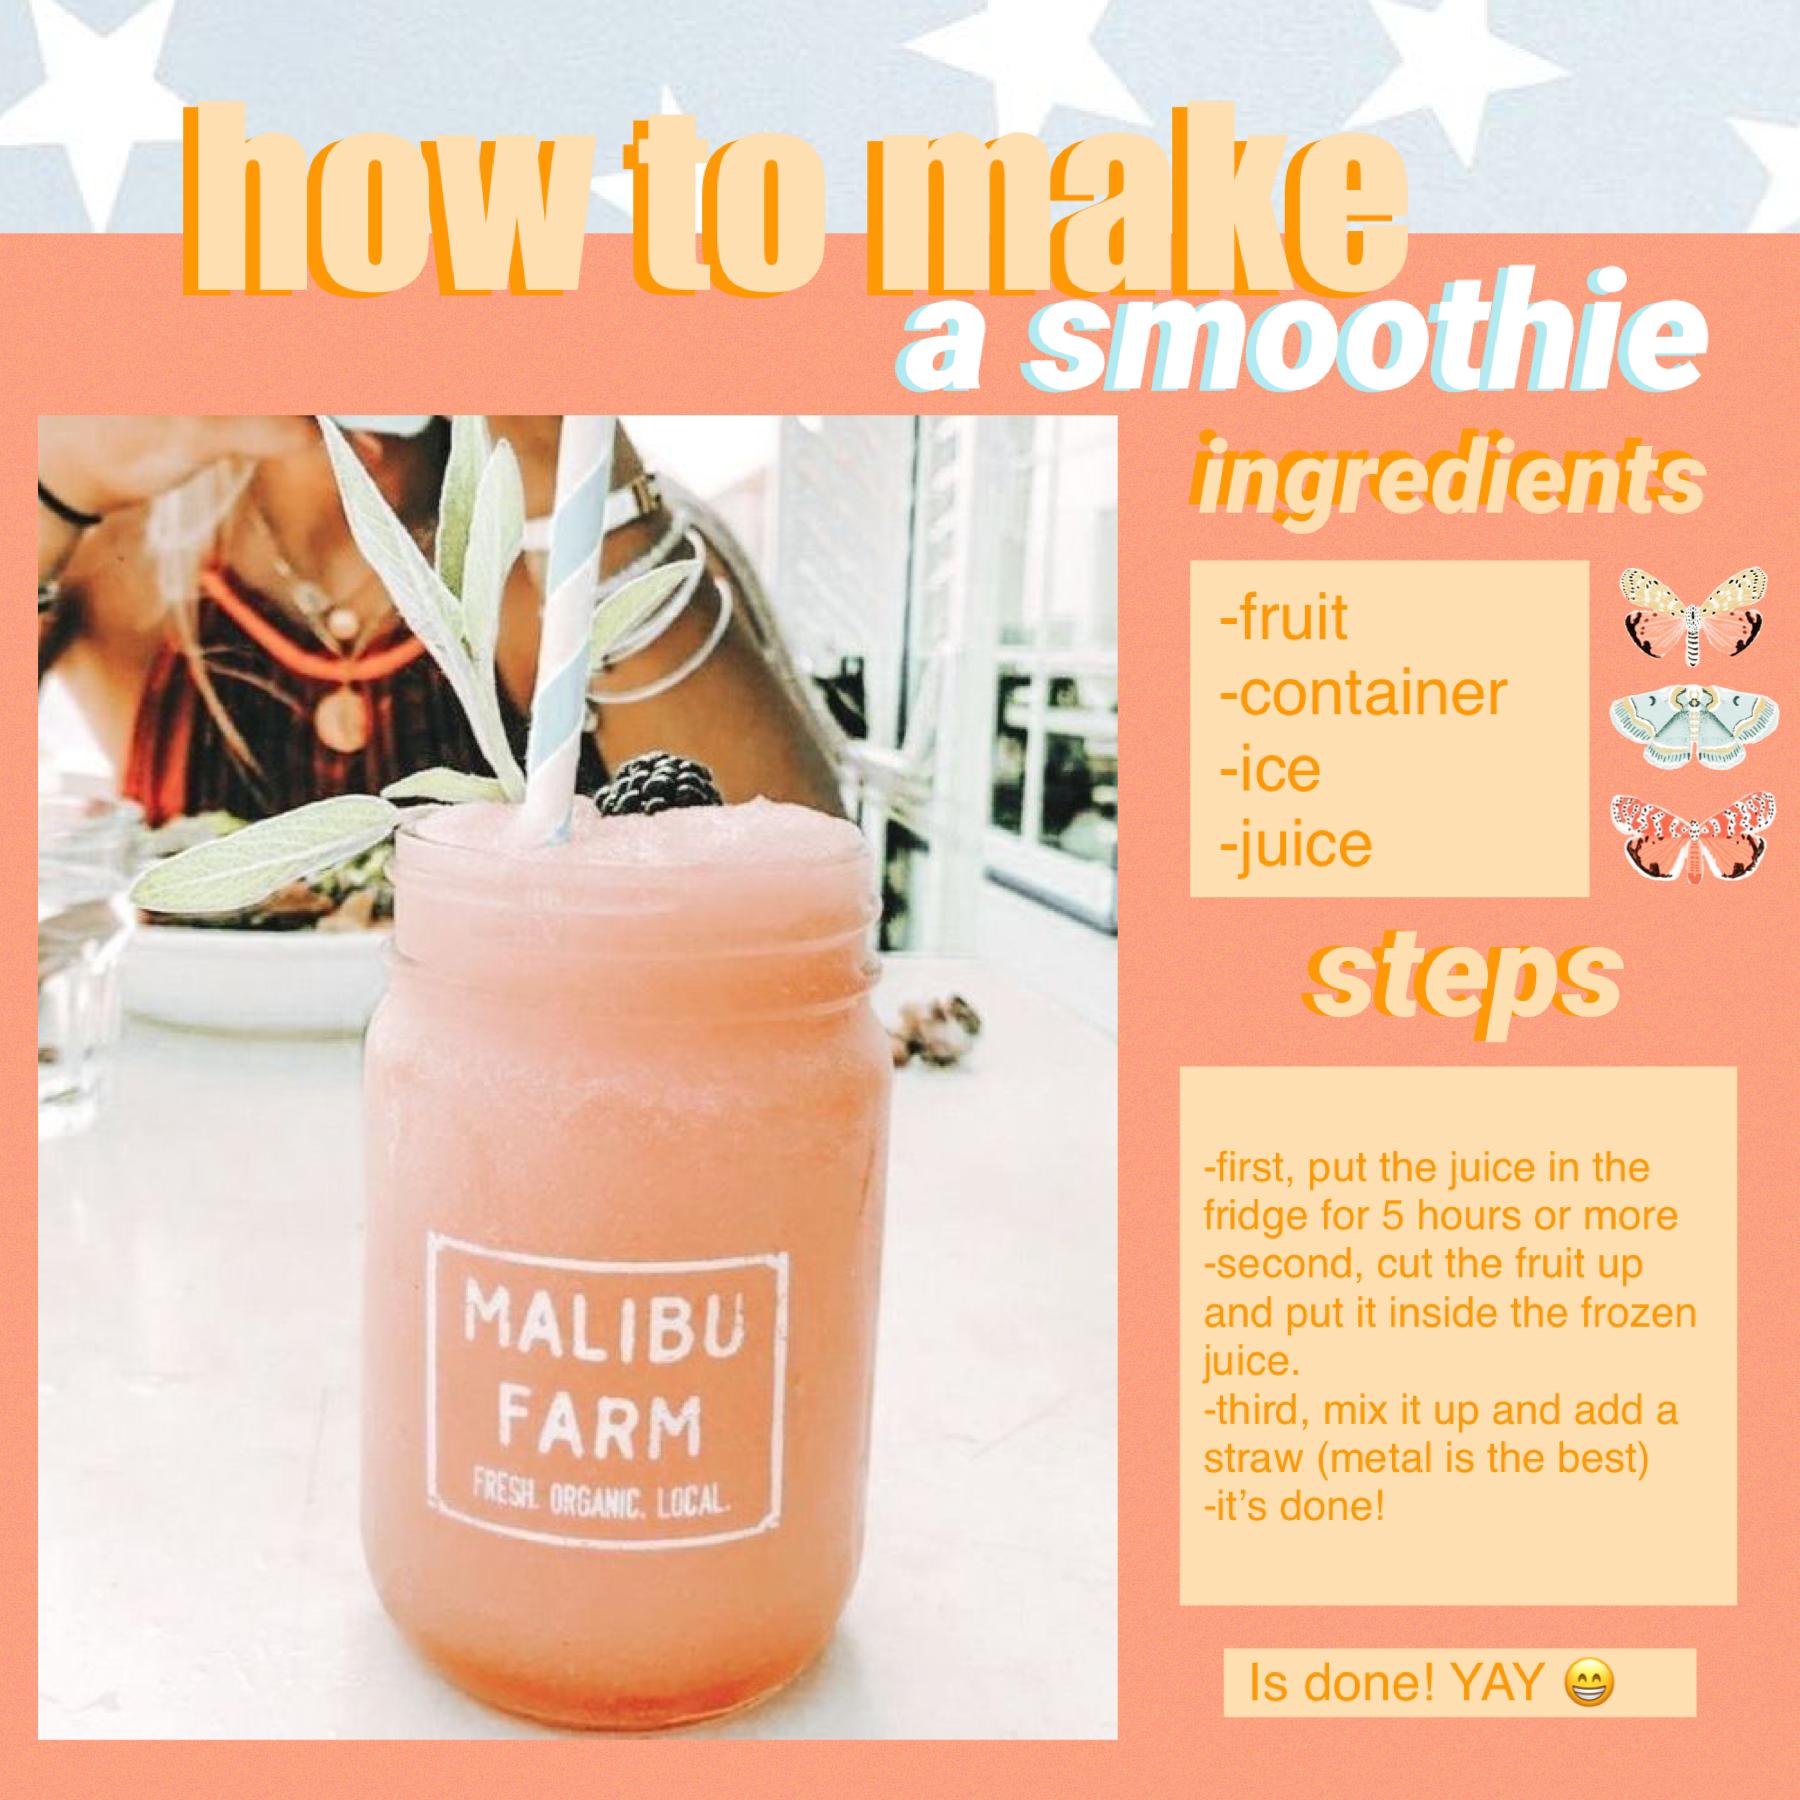 how to make a smoothie-tap-

A lot of you were like “wow I wanna smoothie” and I decided to make a page on how to make one! It’s super fun! U should try it sometime :)